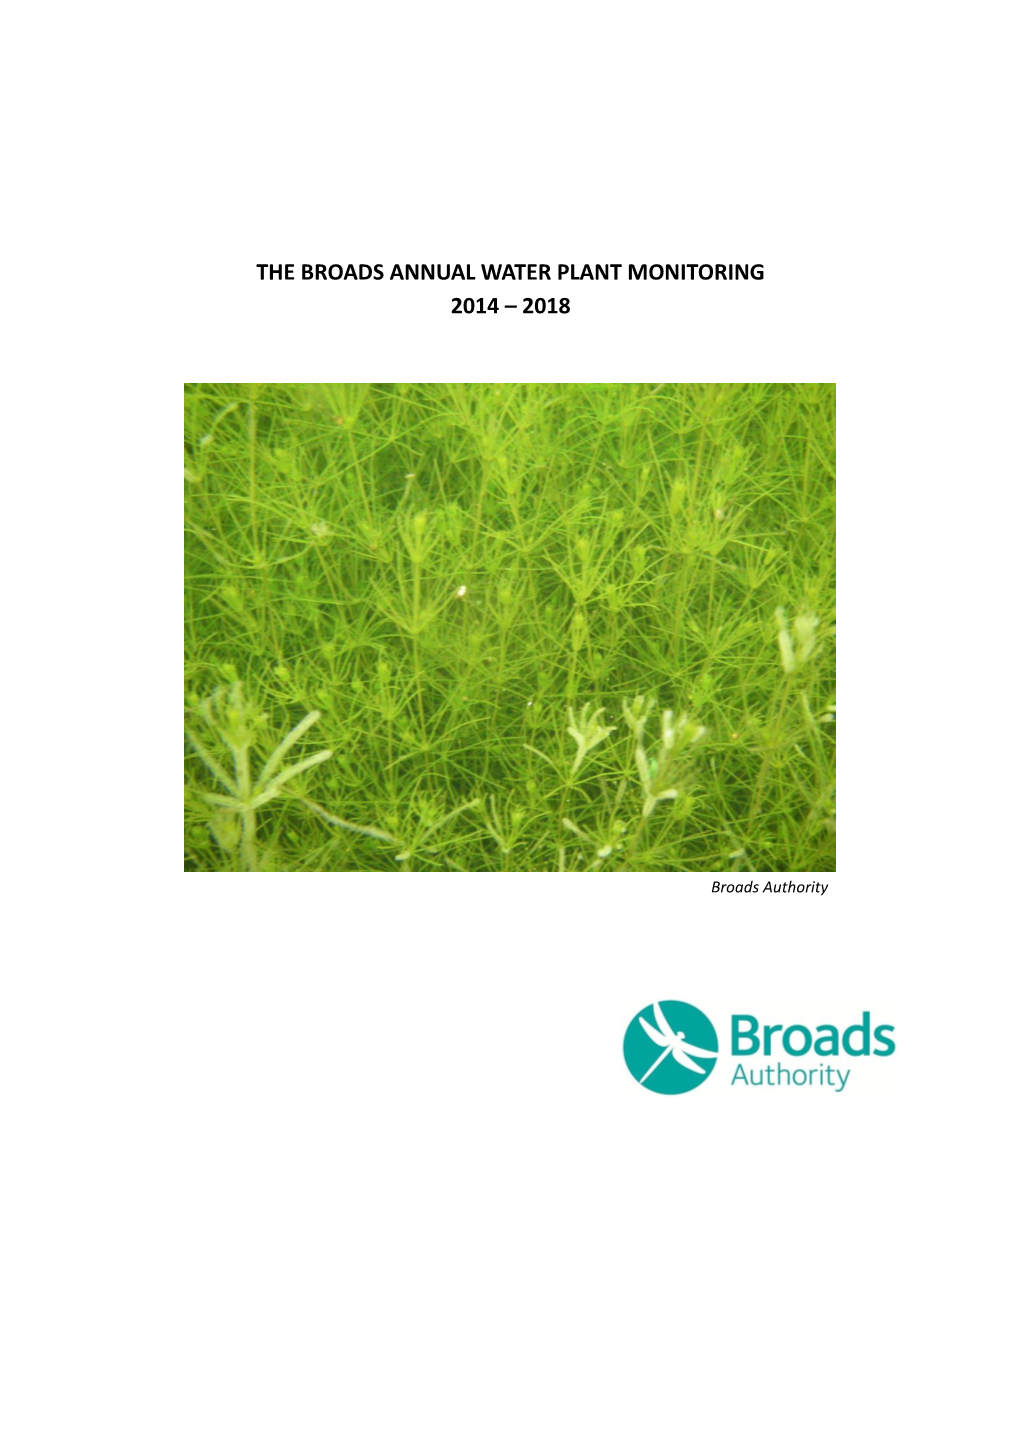 The Broads Annual Water Plant Monitoring 2014 – 2018